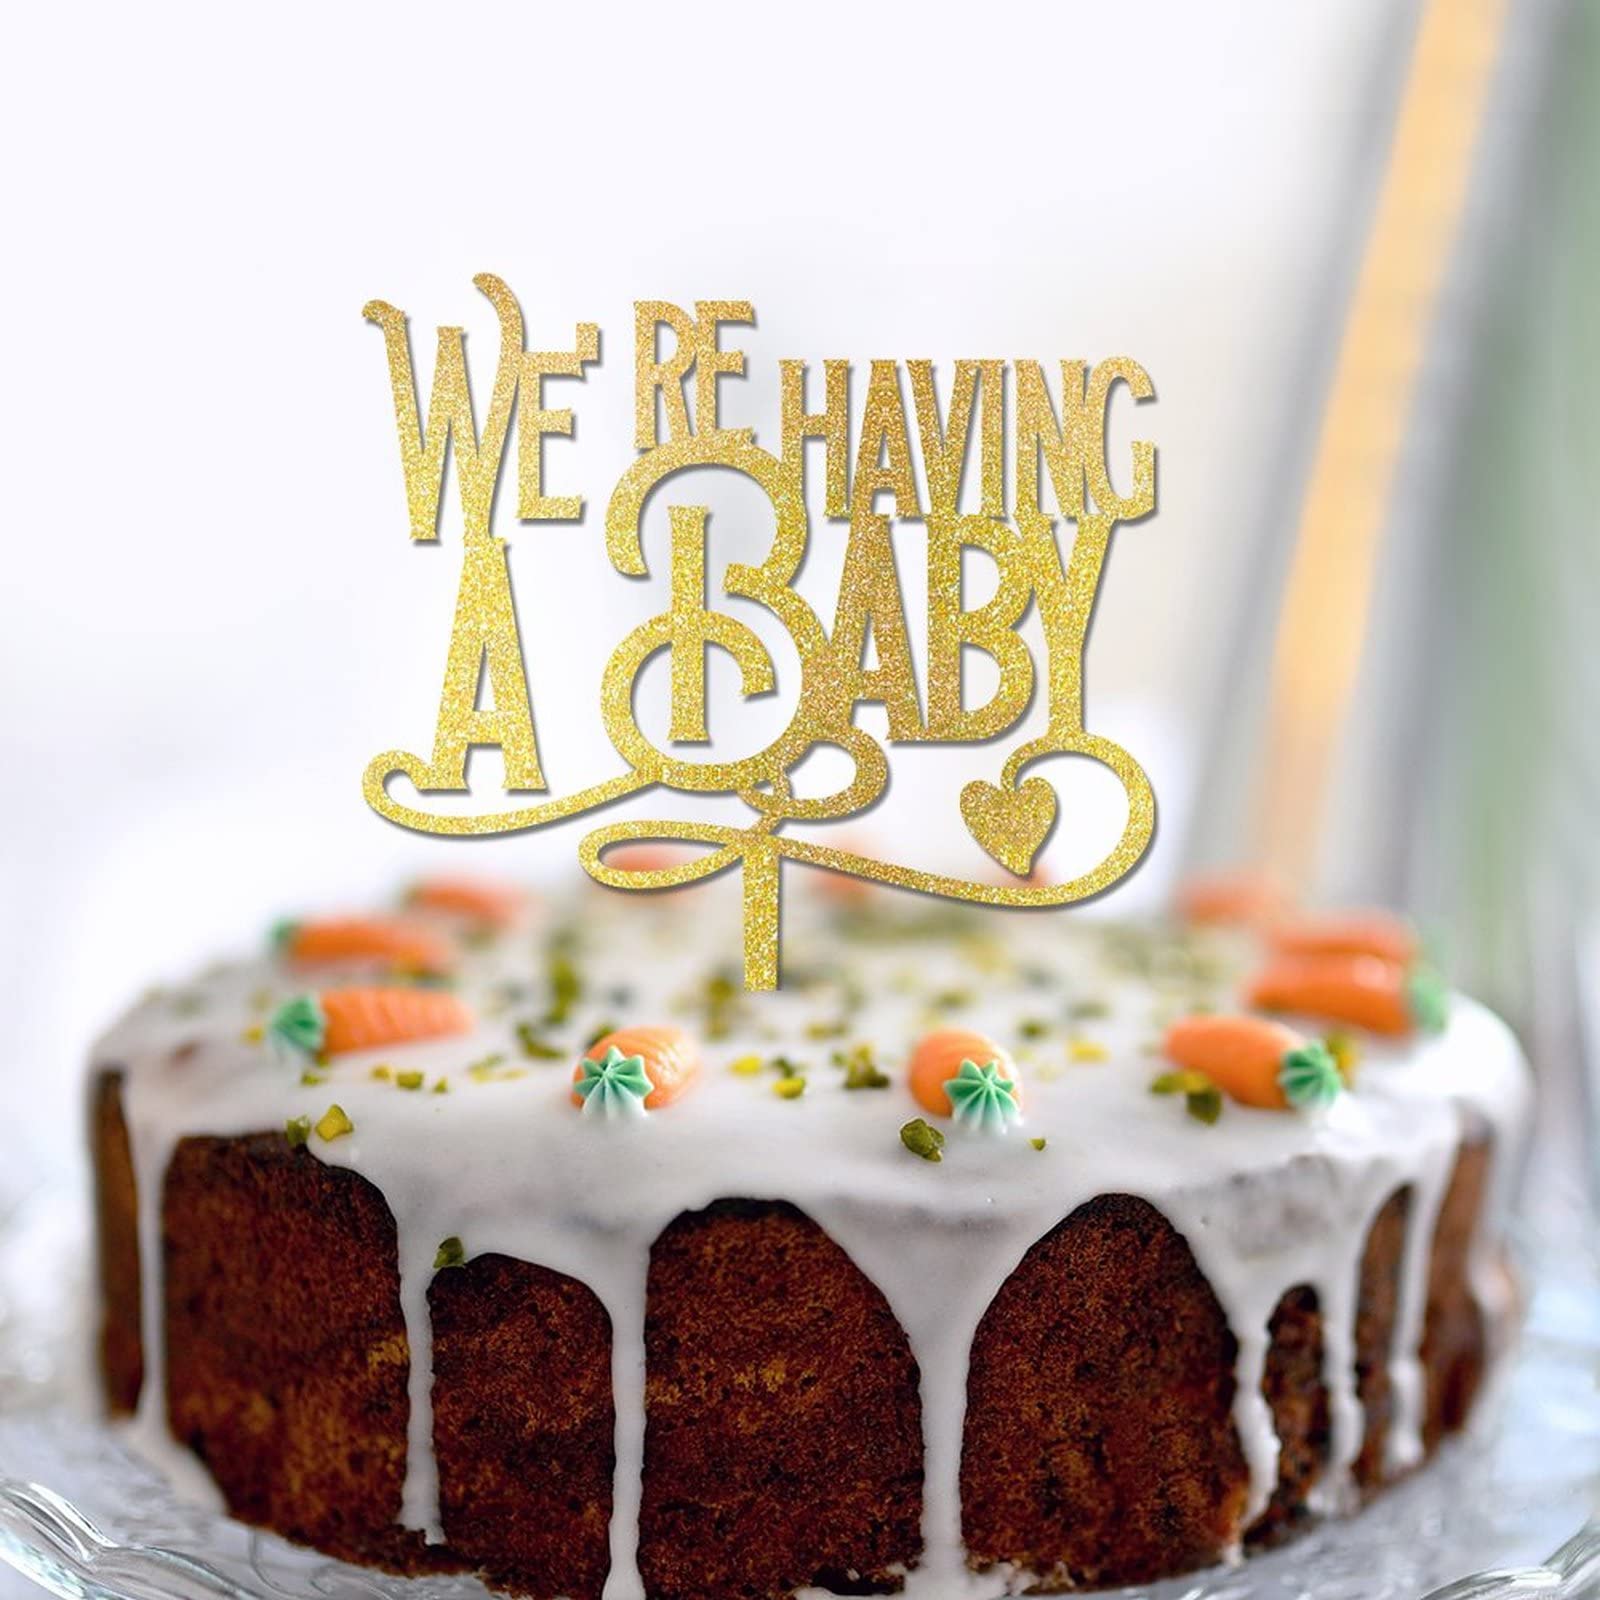 We're Having A Baby Baby Shower Cake Topper Mama To Be Party Favors Personalized Baby Shower Gifts For Baby Boys Girls Glitter Gold